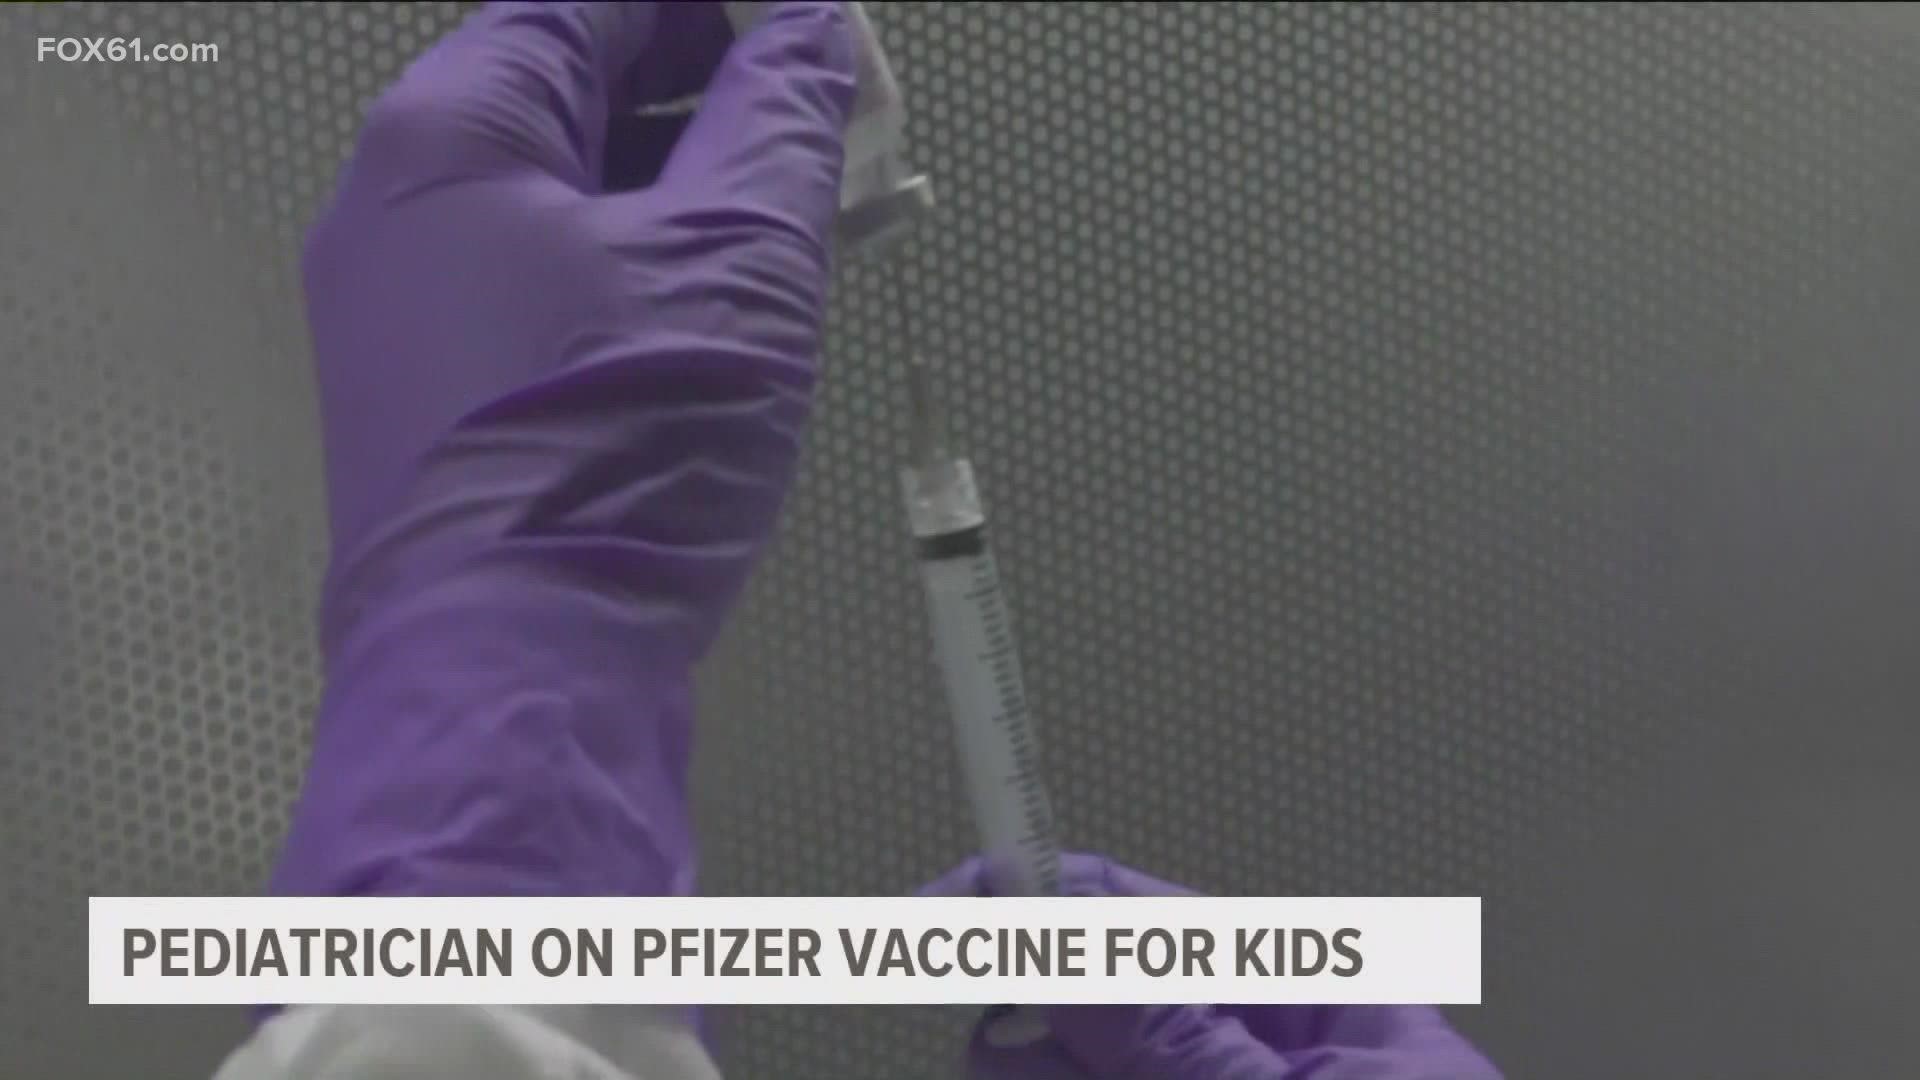 The company says it will soon seek authorization for the age group to use the vaccine.